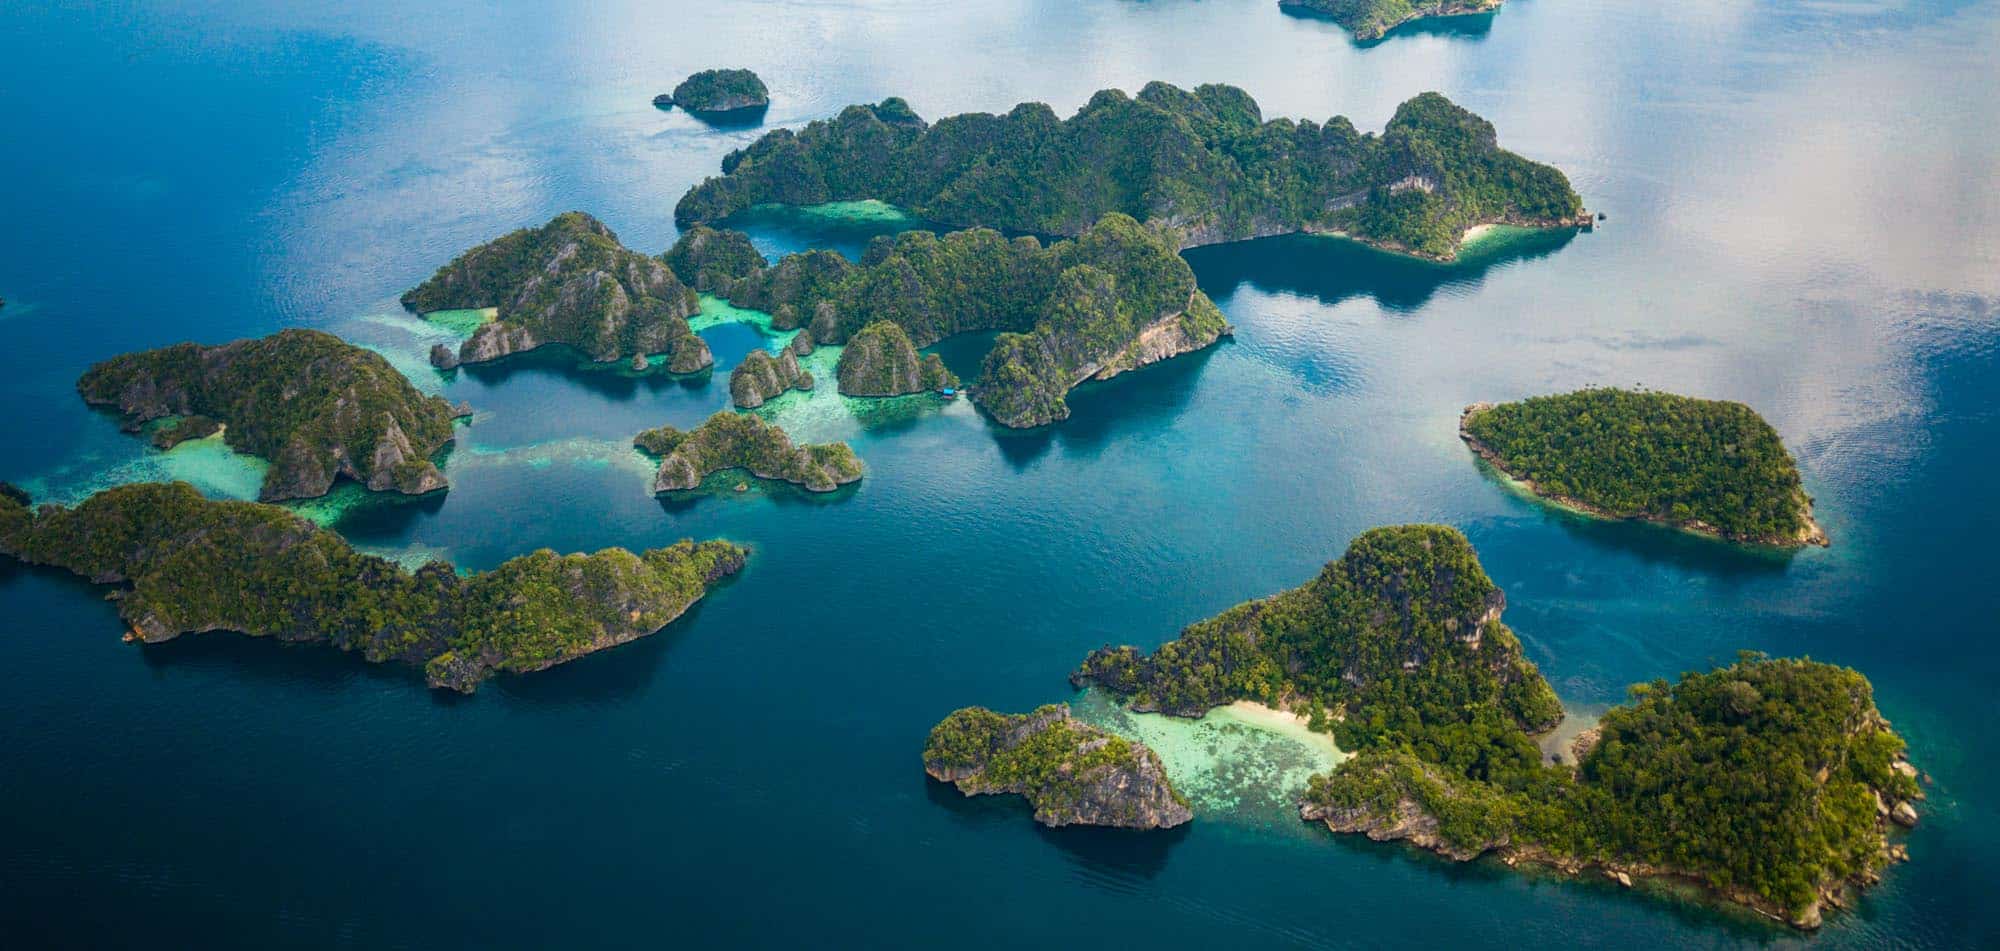 Aerial view of Raja Ampat's emerald green islands where only private yacht charters go